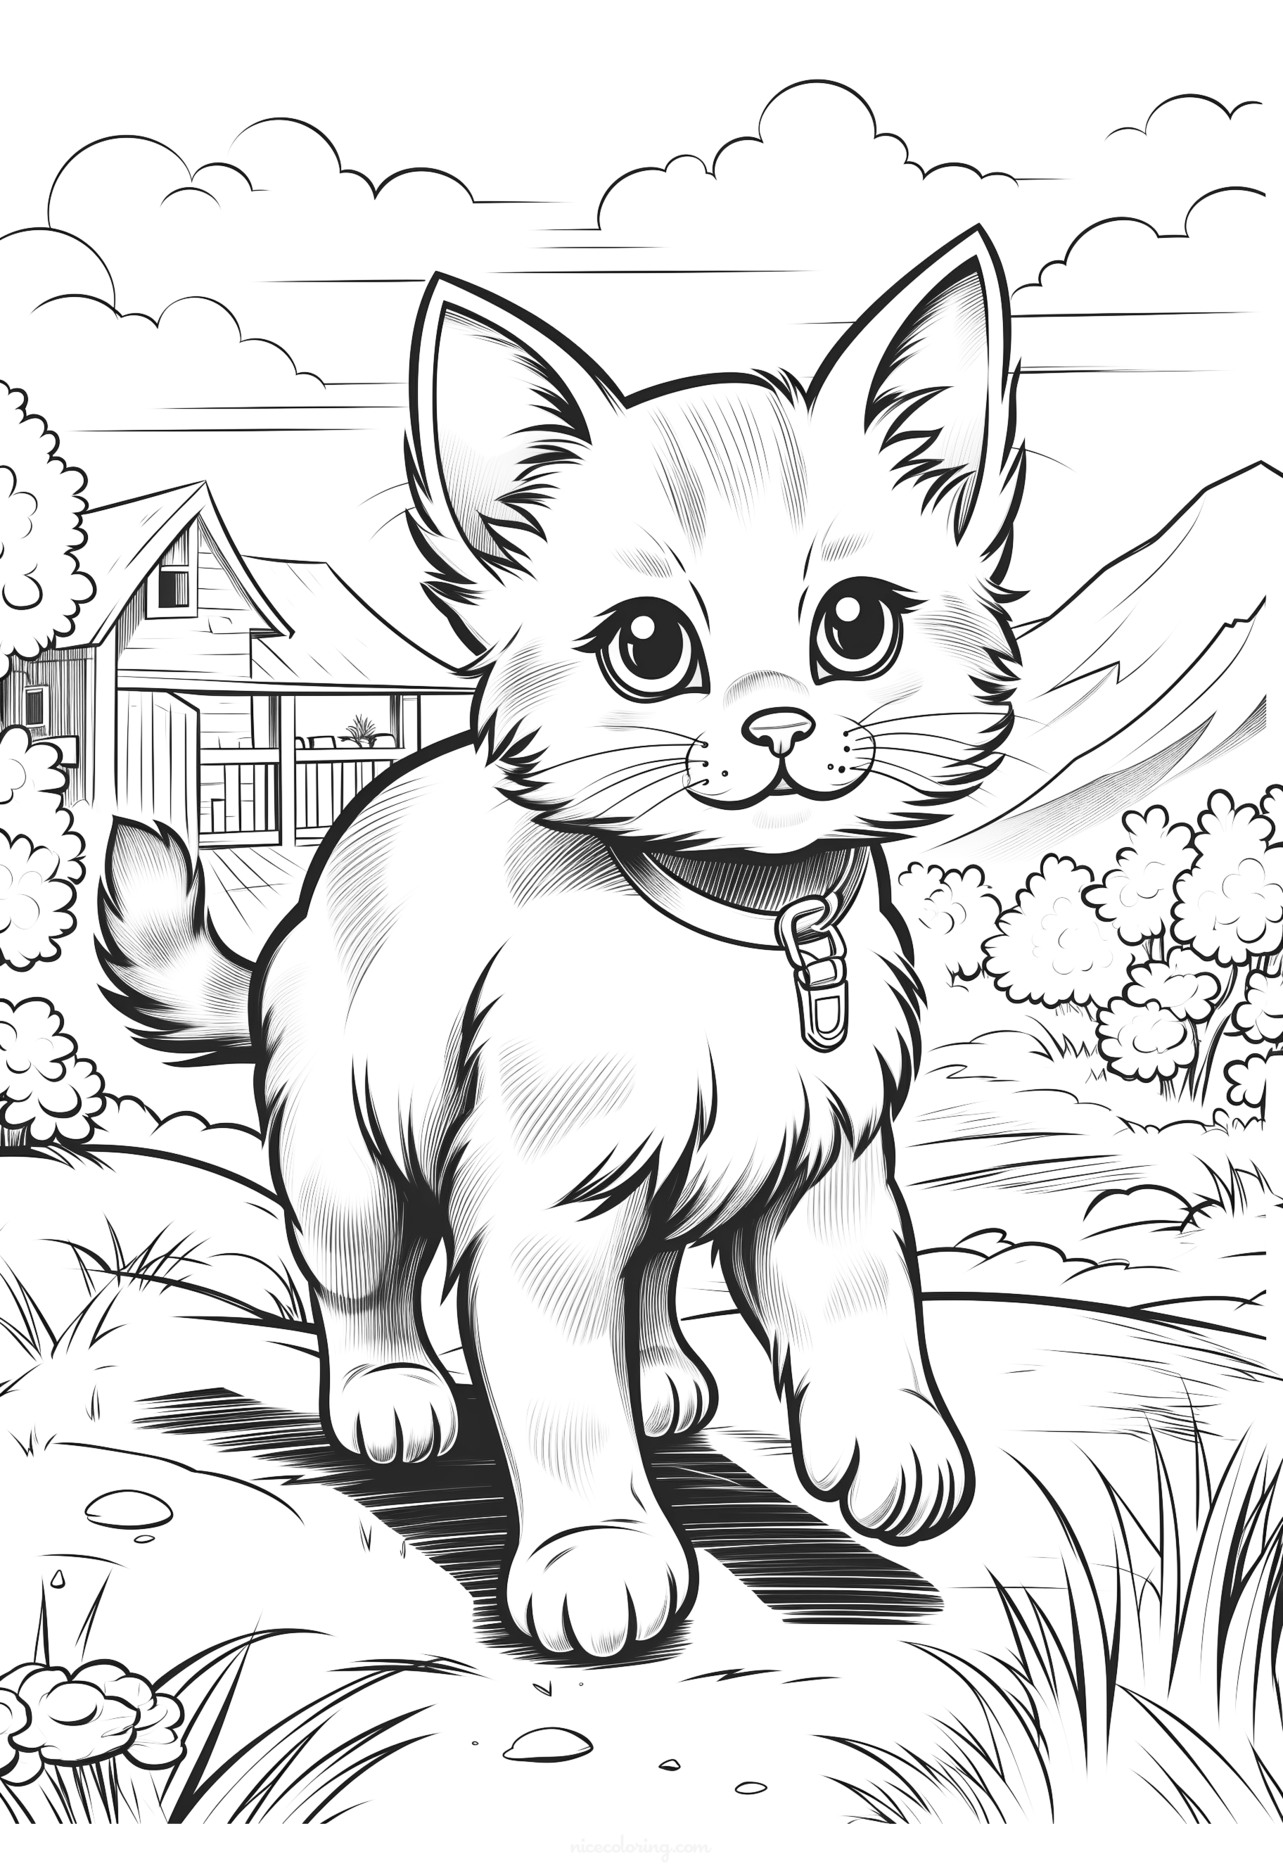 Cute cat sitting and smiling, waiting to be colored